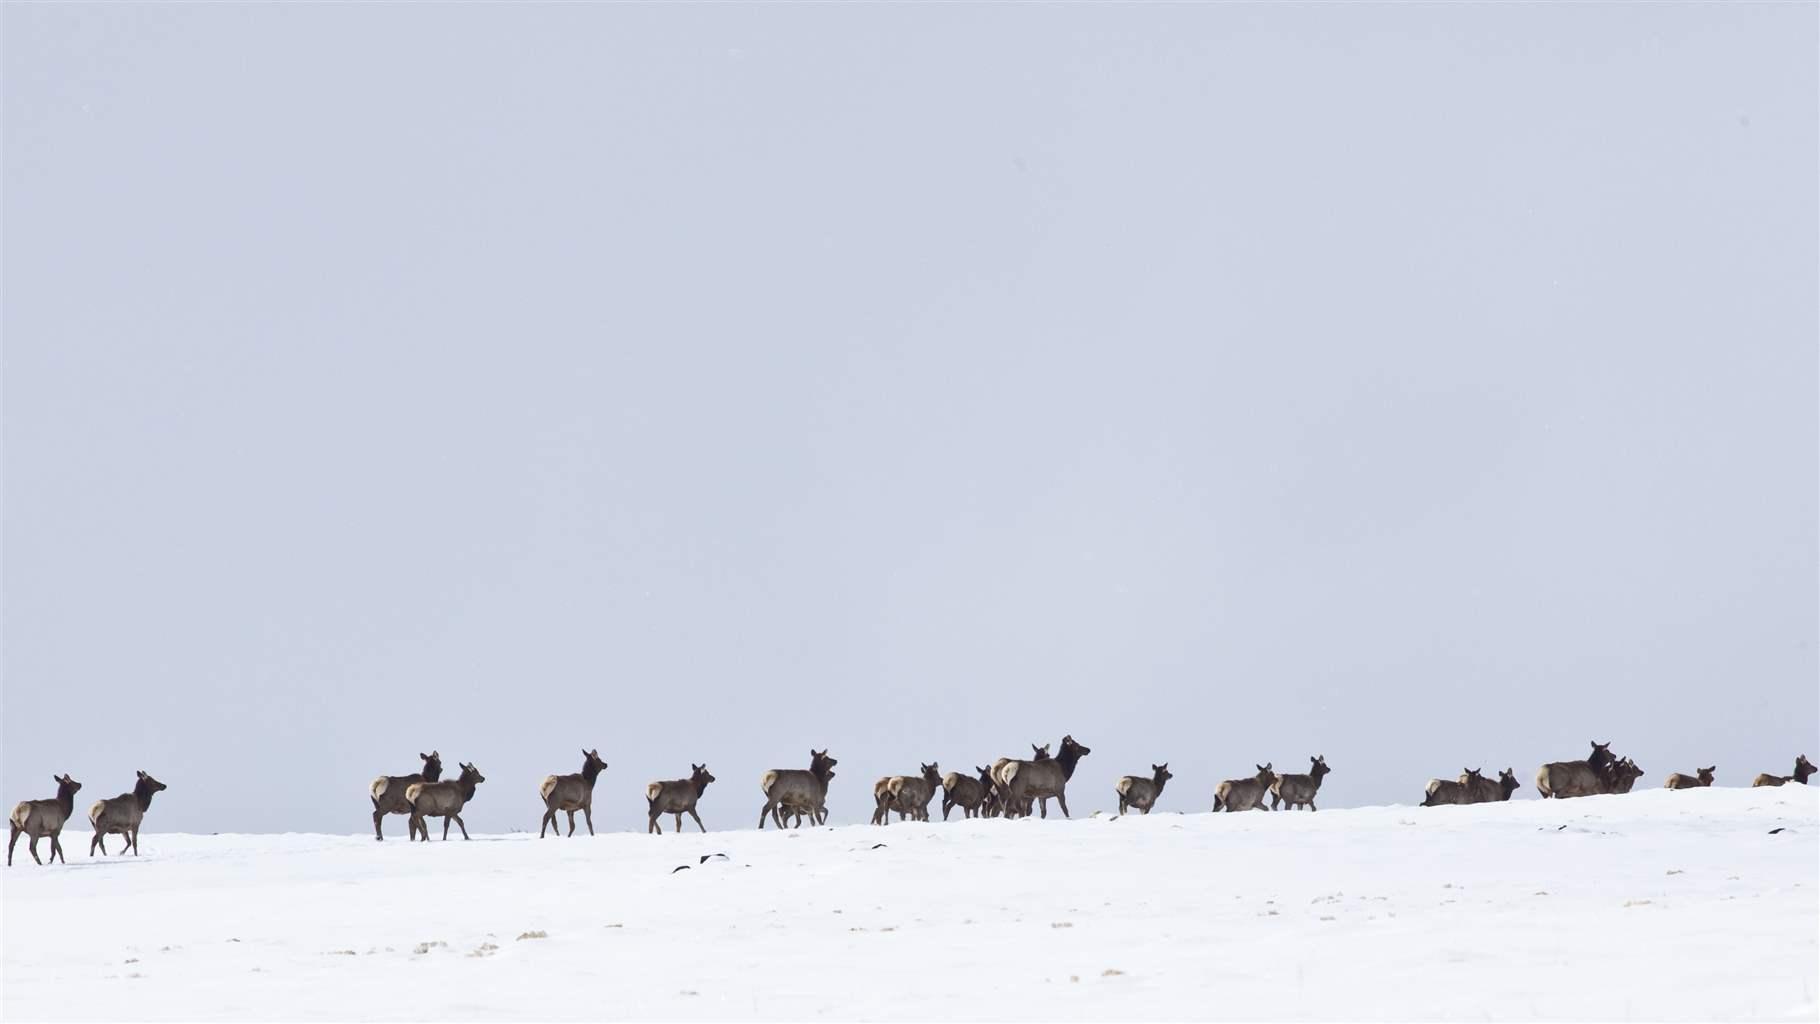 Elk move across the Río Grande del Norte National Monument in northern New Mexico. The migration routes of wildlife are often interrupted by roads, sometimes making seasonal safe passage for the animals nearly impossible.